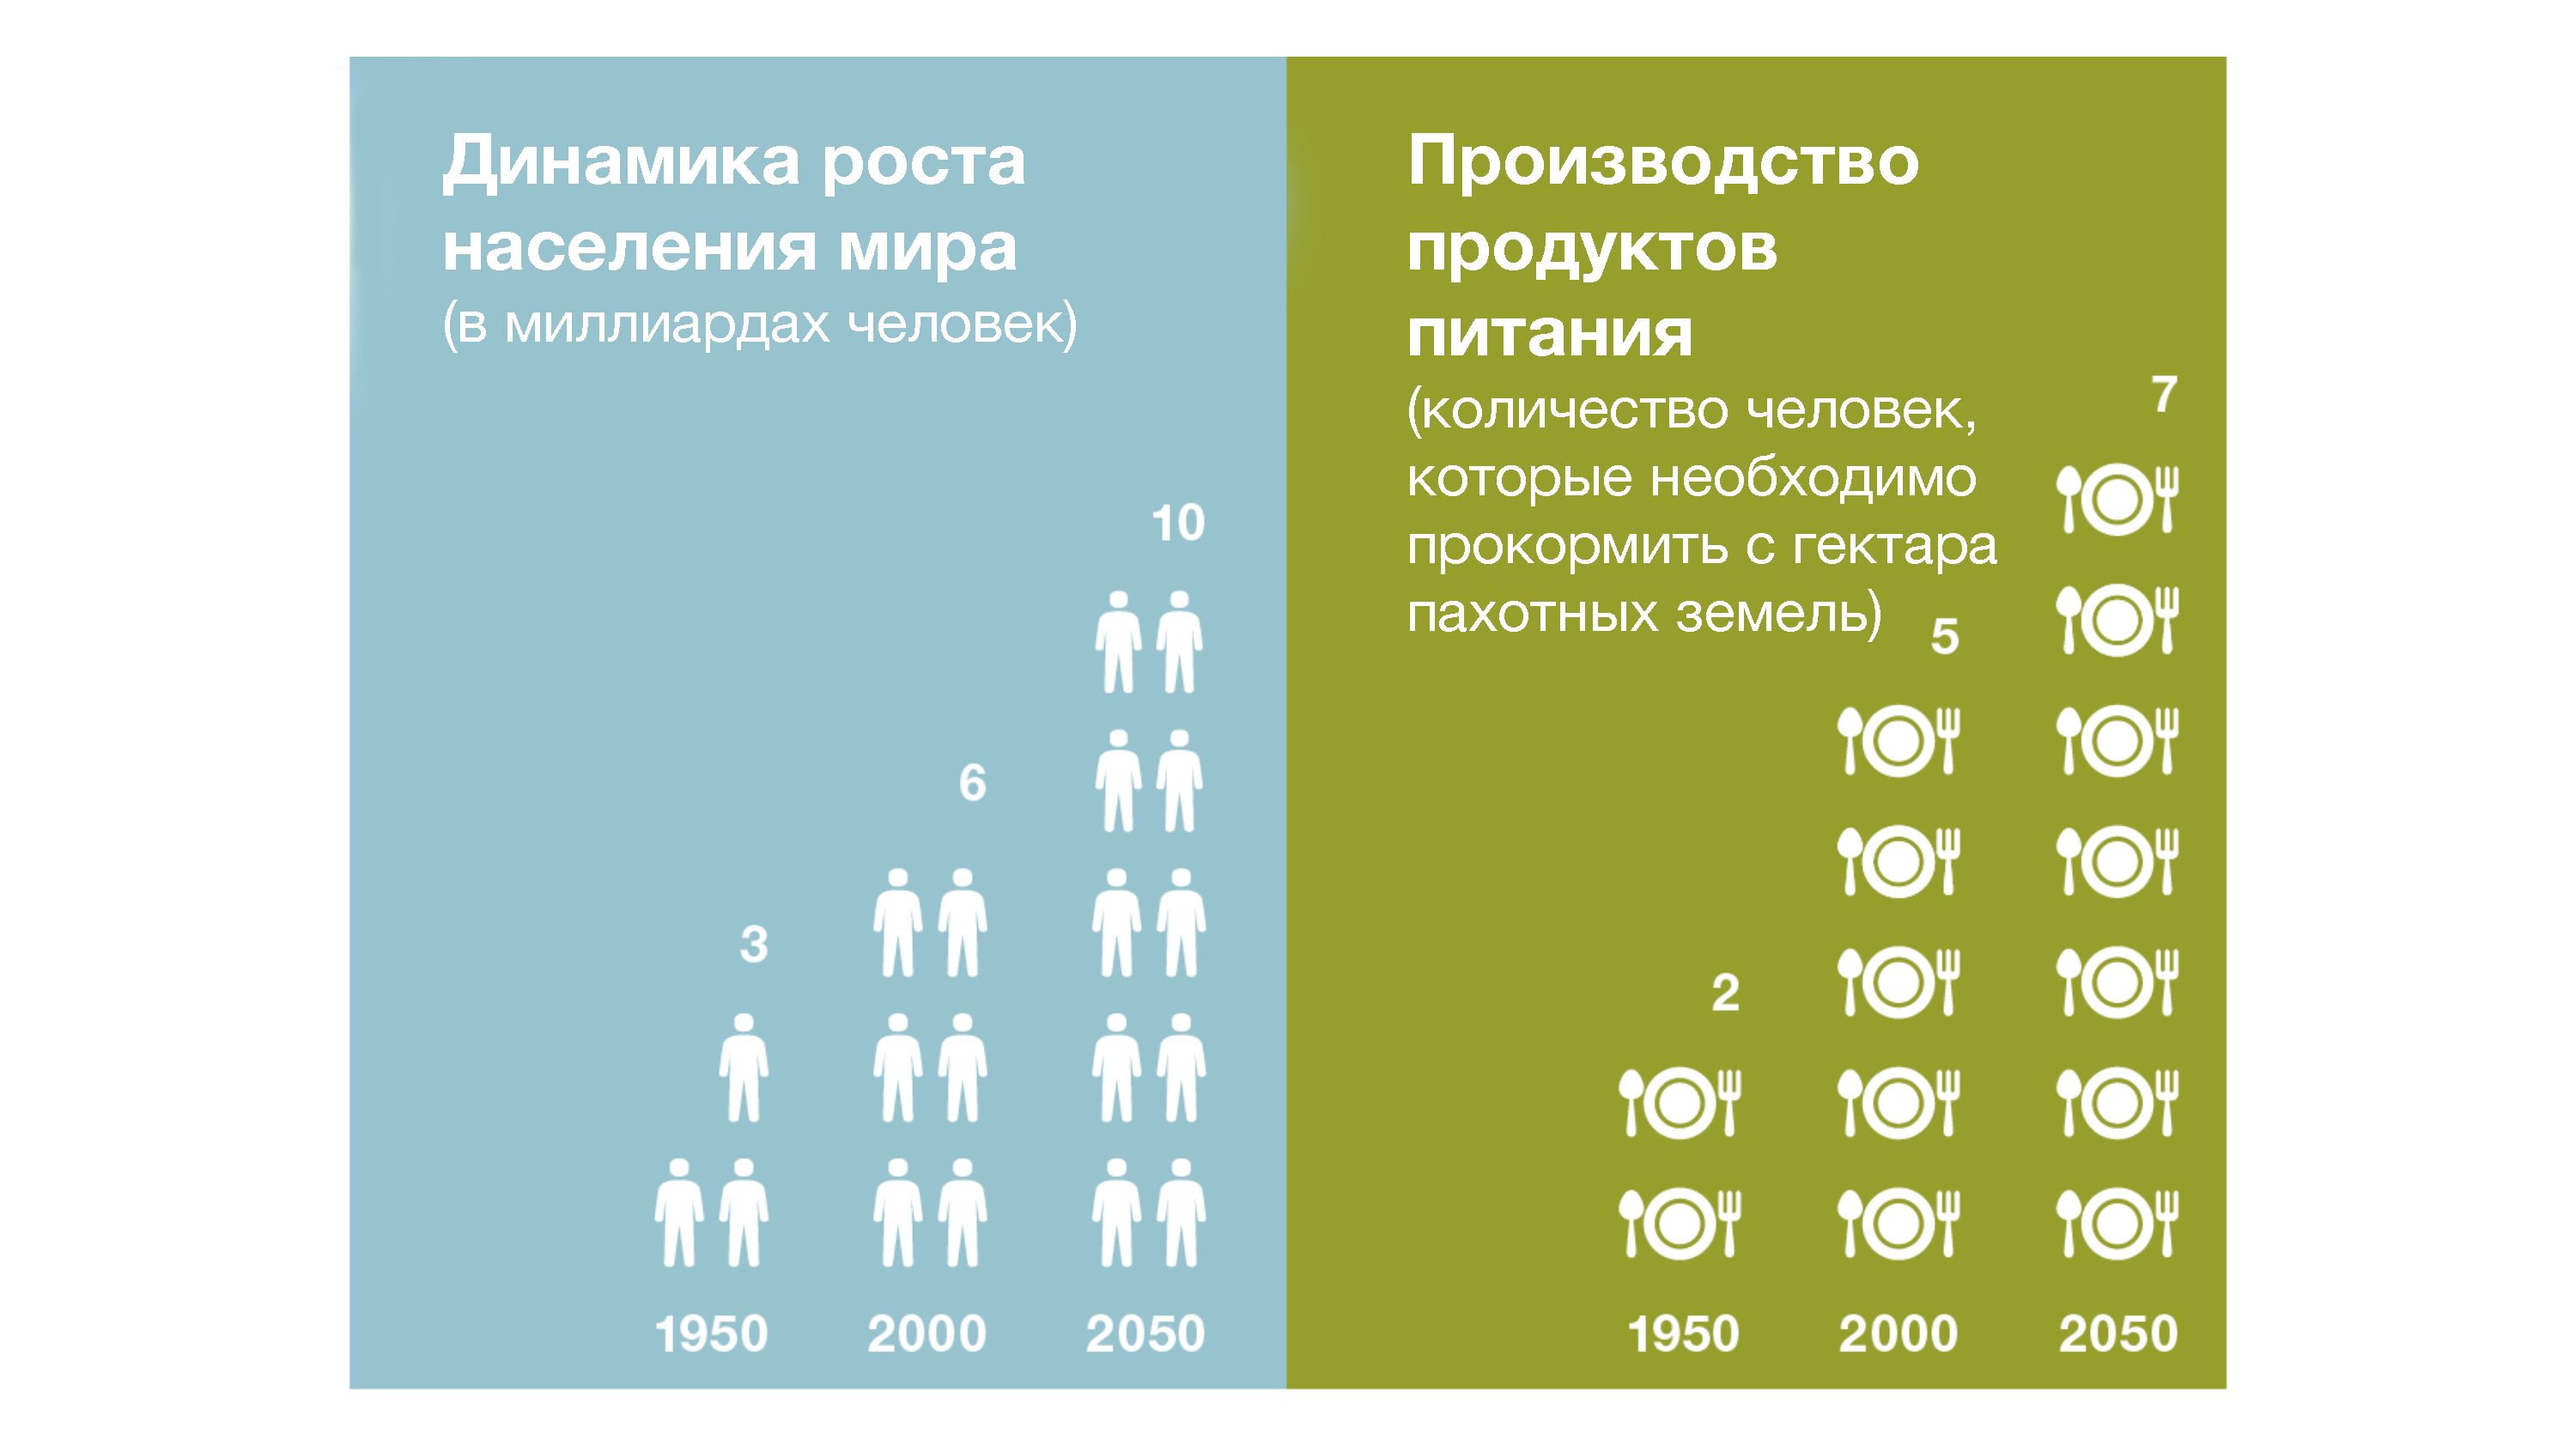 KWS-RU-Innovation-Infographic-future-food-production.png